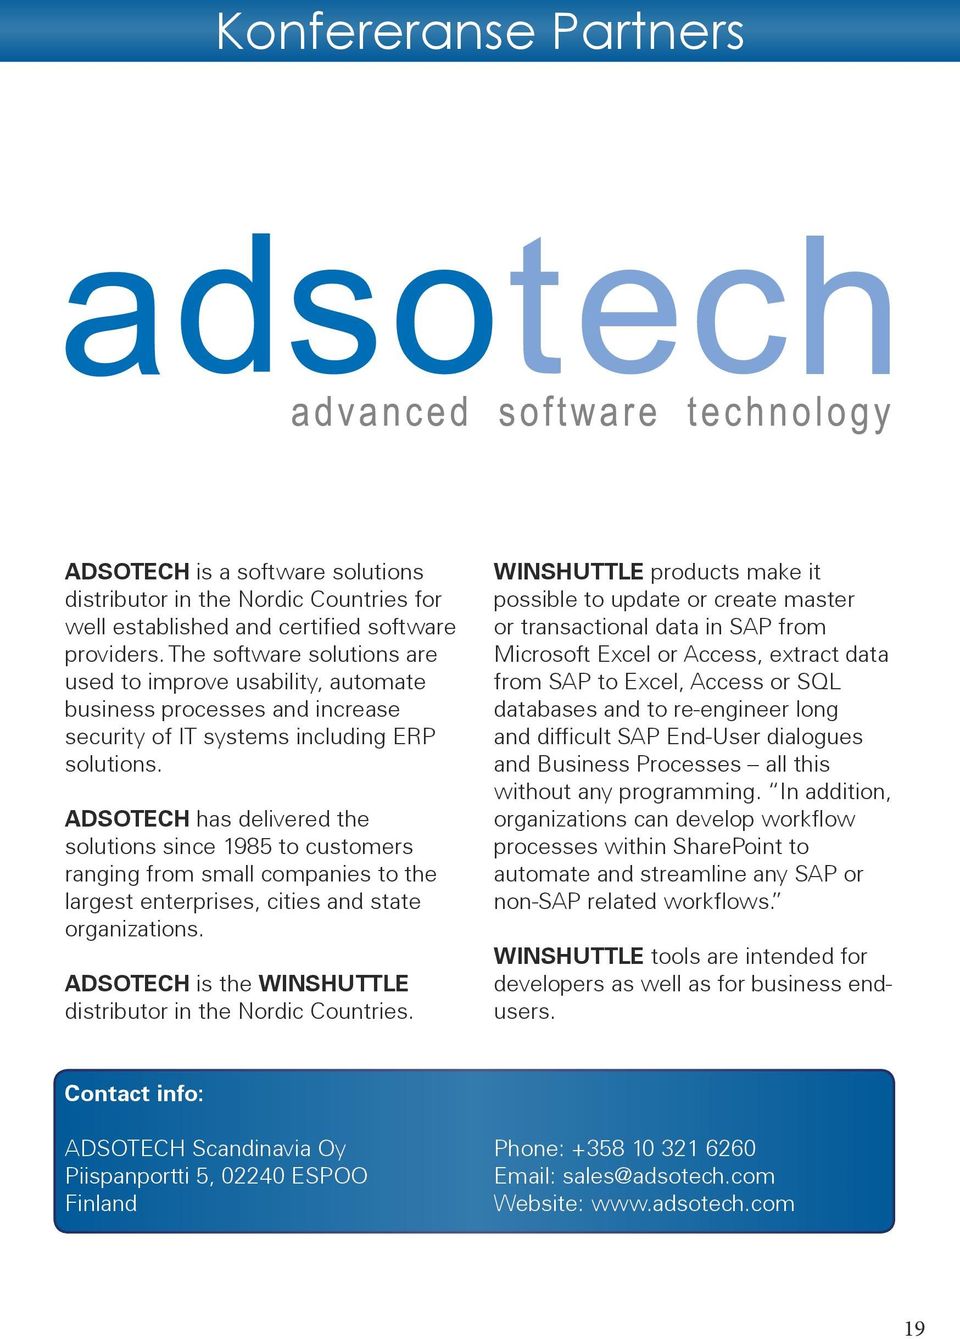 ADSOTECH has delivered the solutions since 1985 to customers ranging from small companies to the largest enterprises, cities and state organizations.